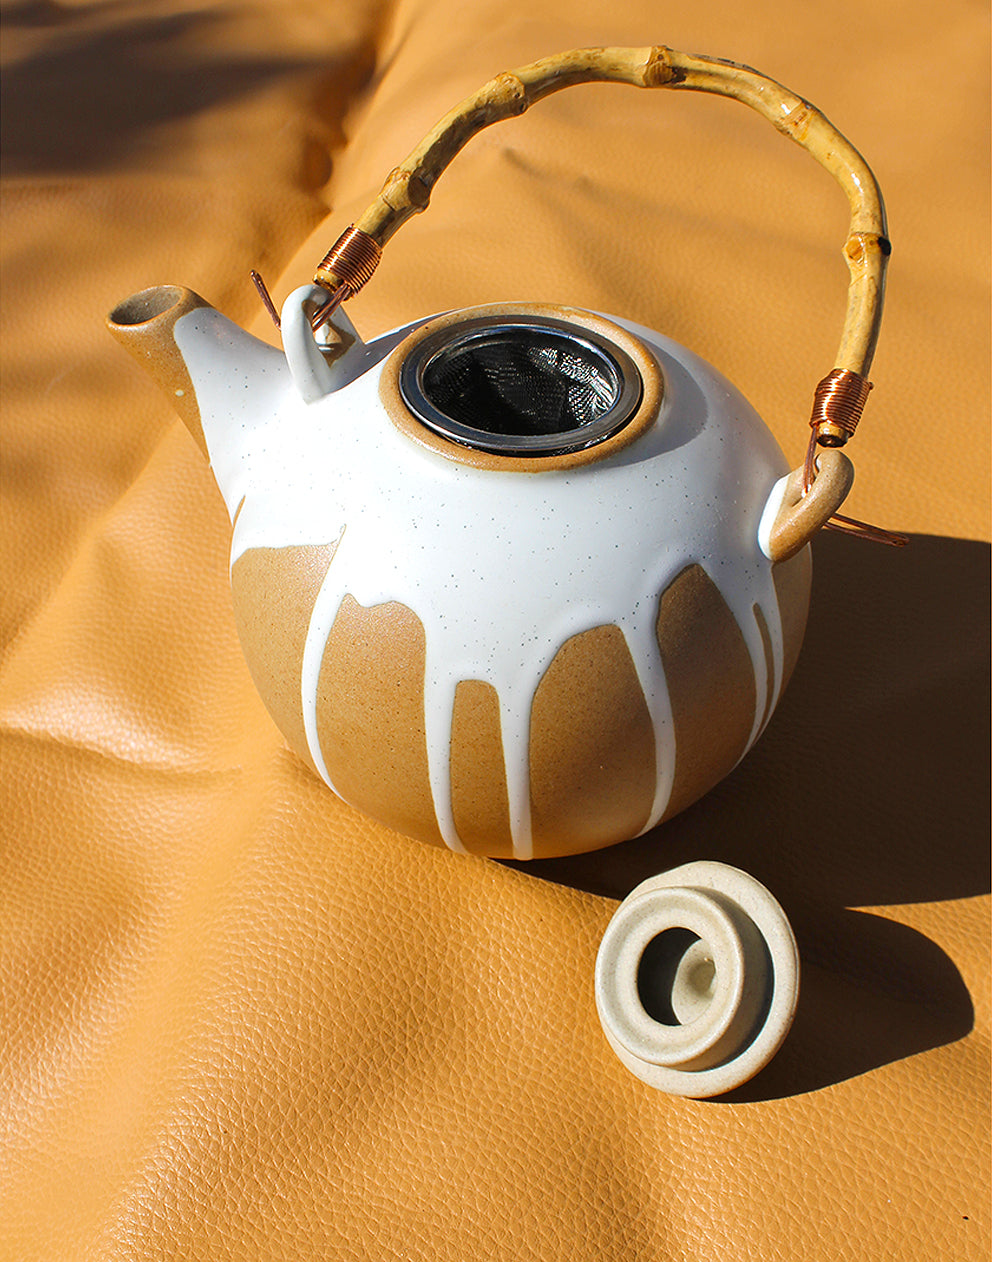 Stoneware Teapot with Bamboo Handle